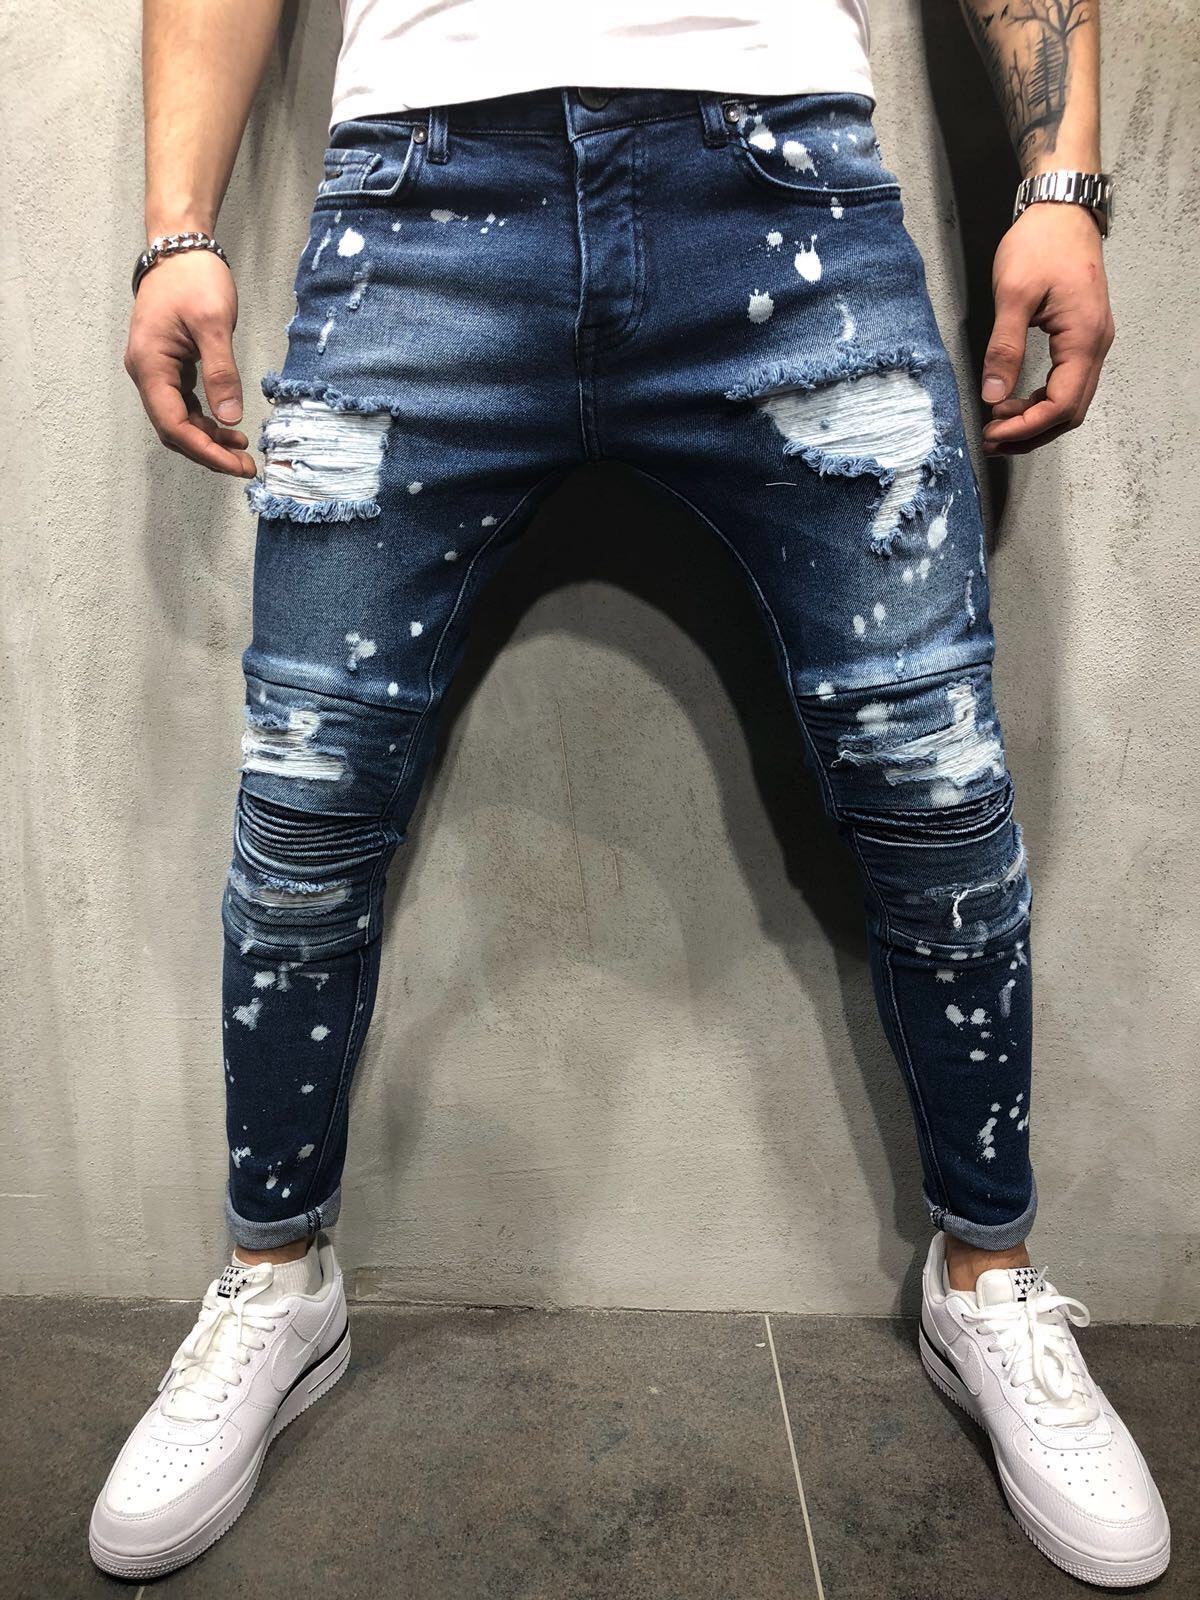 

Mens Jeans Straight Slim Fit Biker Jeans Pants Distressed Skinny Ripped Destroyed Denim Jeans Washed Hiphop Pants Fashion Style, Blue